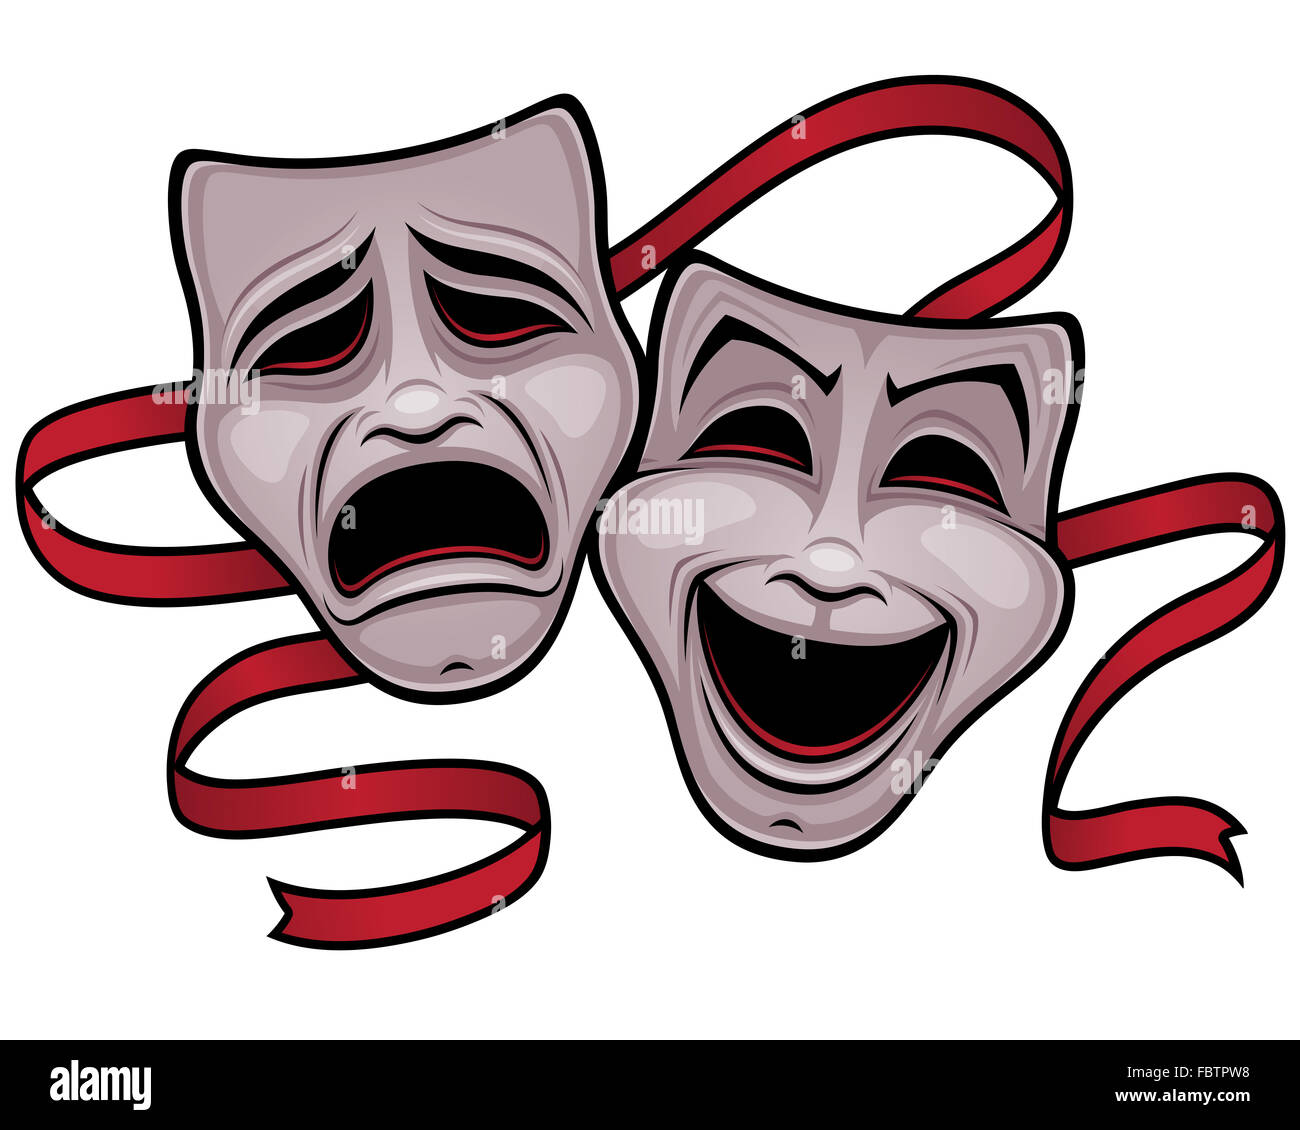 comedy-and-tragedy-theater-masks-FBTPW8.